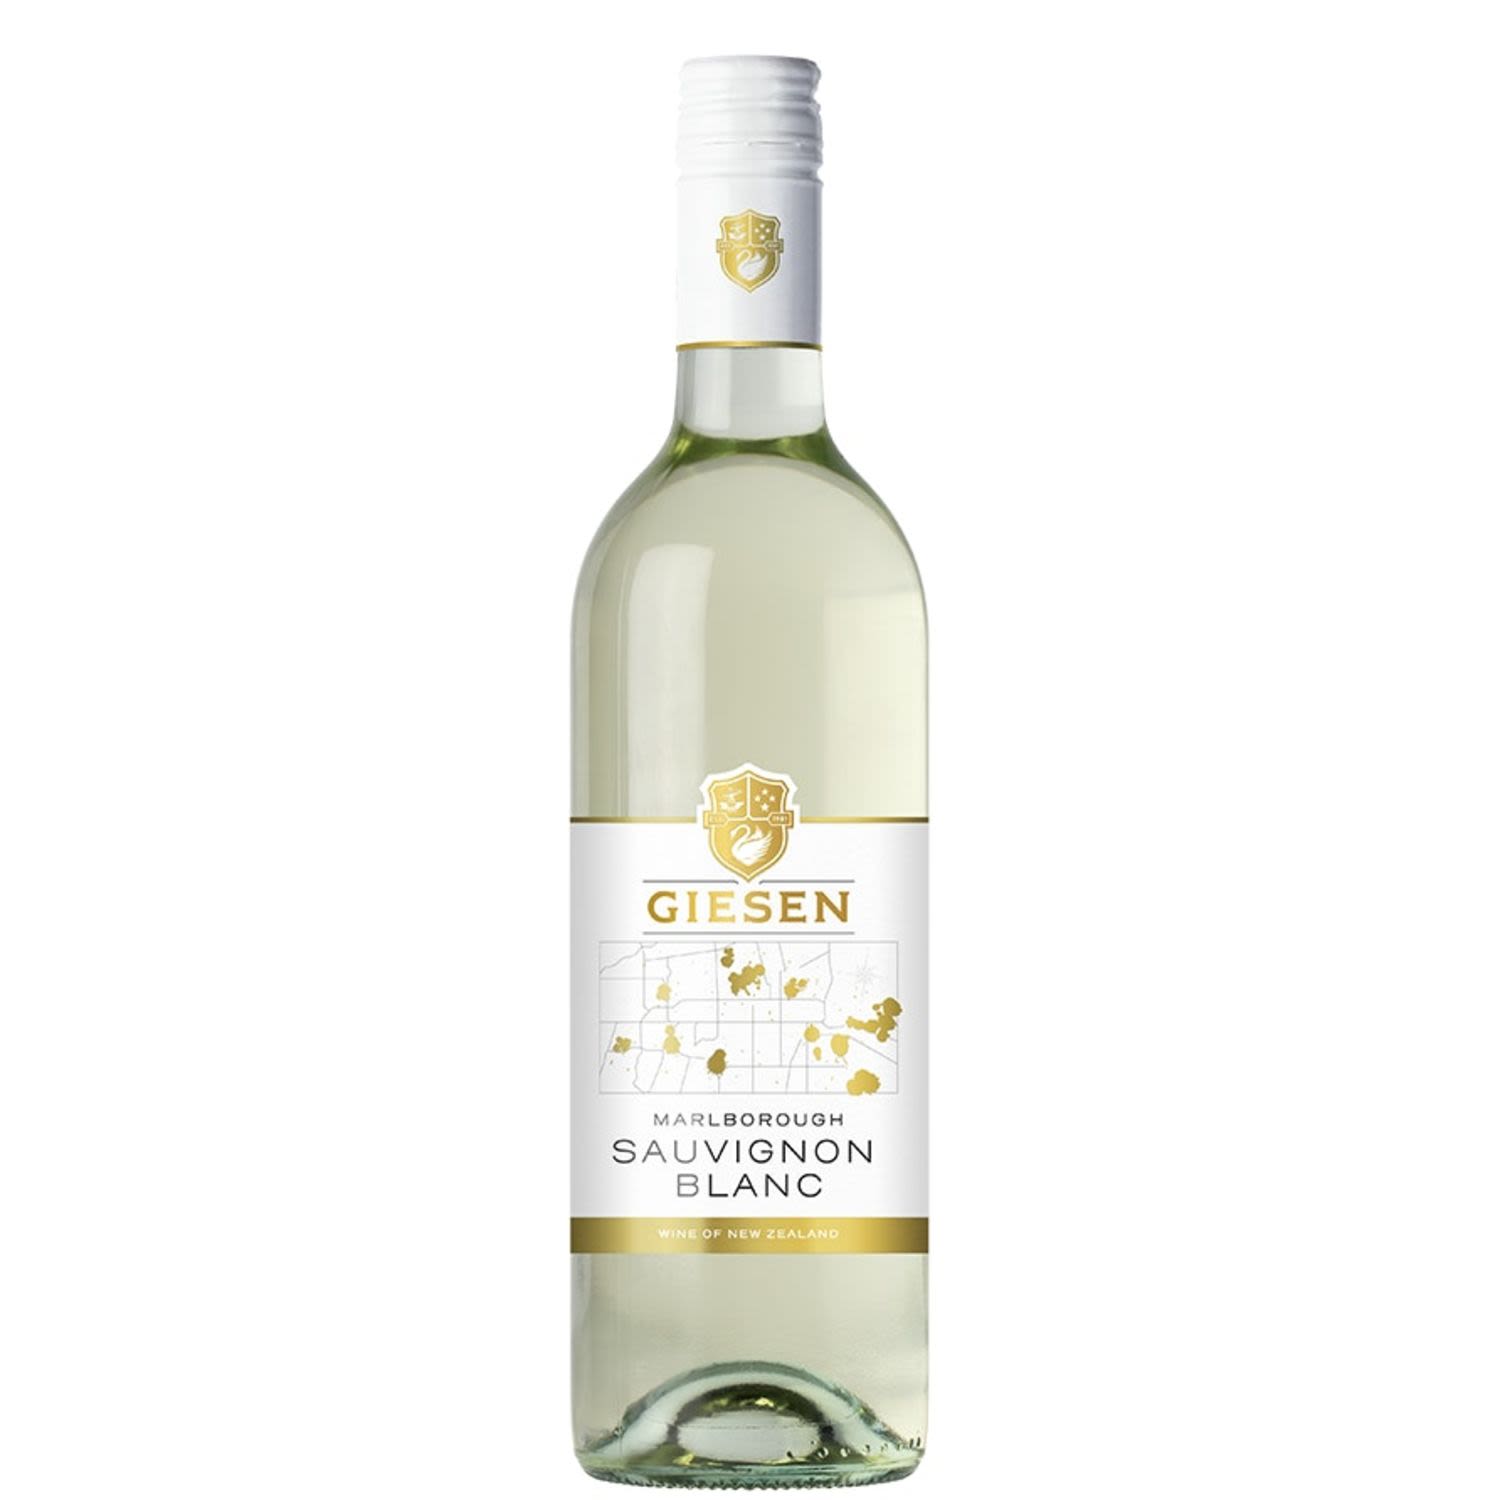 This Marlborough Sauvignon Blanc is aromatically expressive and generously flavoured with freshly cut herbs, scrumptious tropical fruit with subtle notes of blackcurrant leaf.<br /> <br />Alcohol Volume: 13.00%<br /><br />Pack Format: Bottle<br /><br />Standard Drinks: 7.7</br /><br />Pack Type: Bottle<br /><br />Country of Origin: New Zealand<br /><br />Region: Marlborough<br /><br />Vintage: Vintages Vary<br />